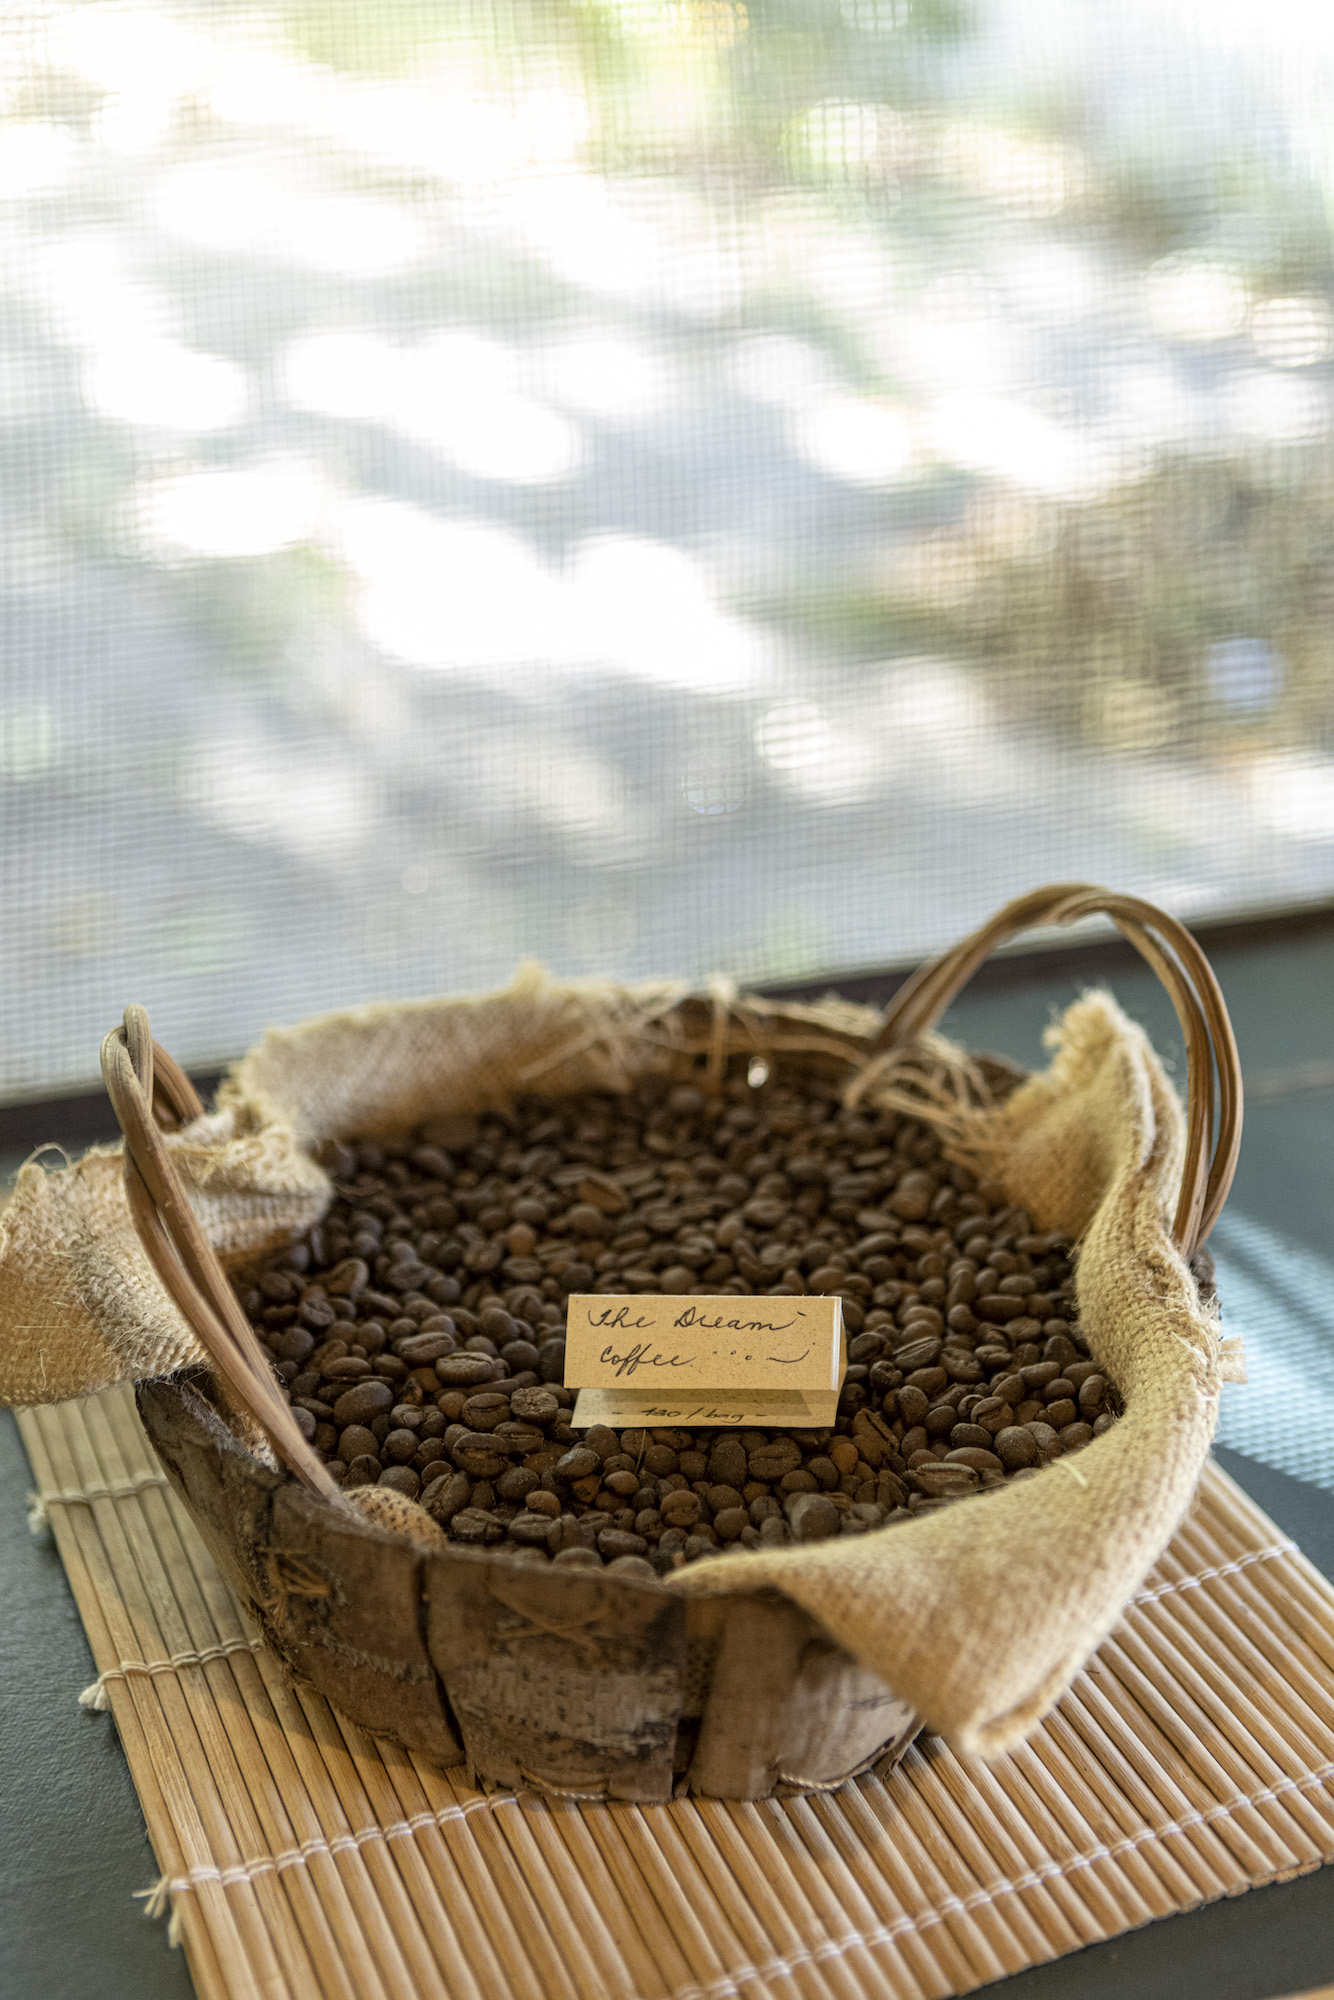 Teahouse at Sambali serves coffee from The Dream and other local coffee beans